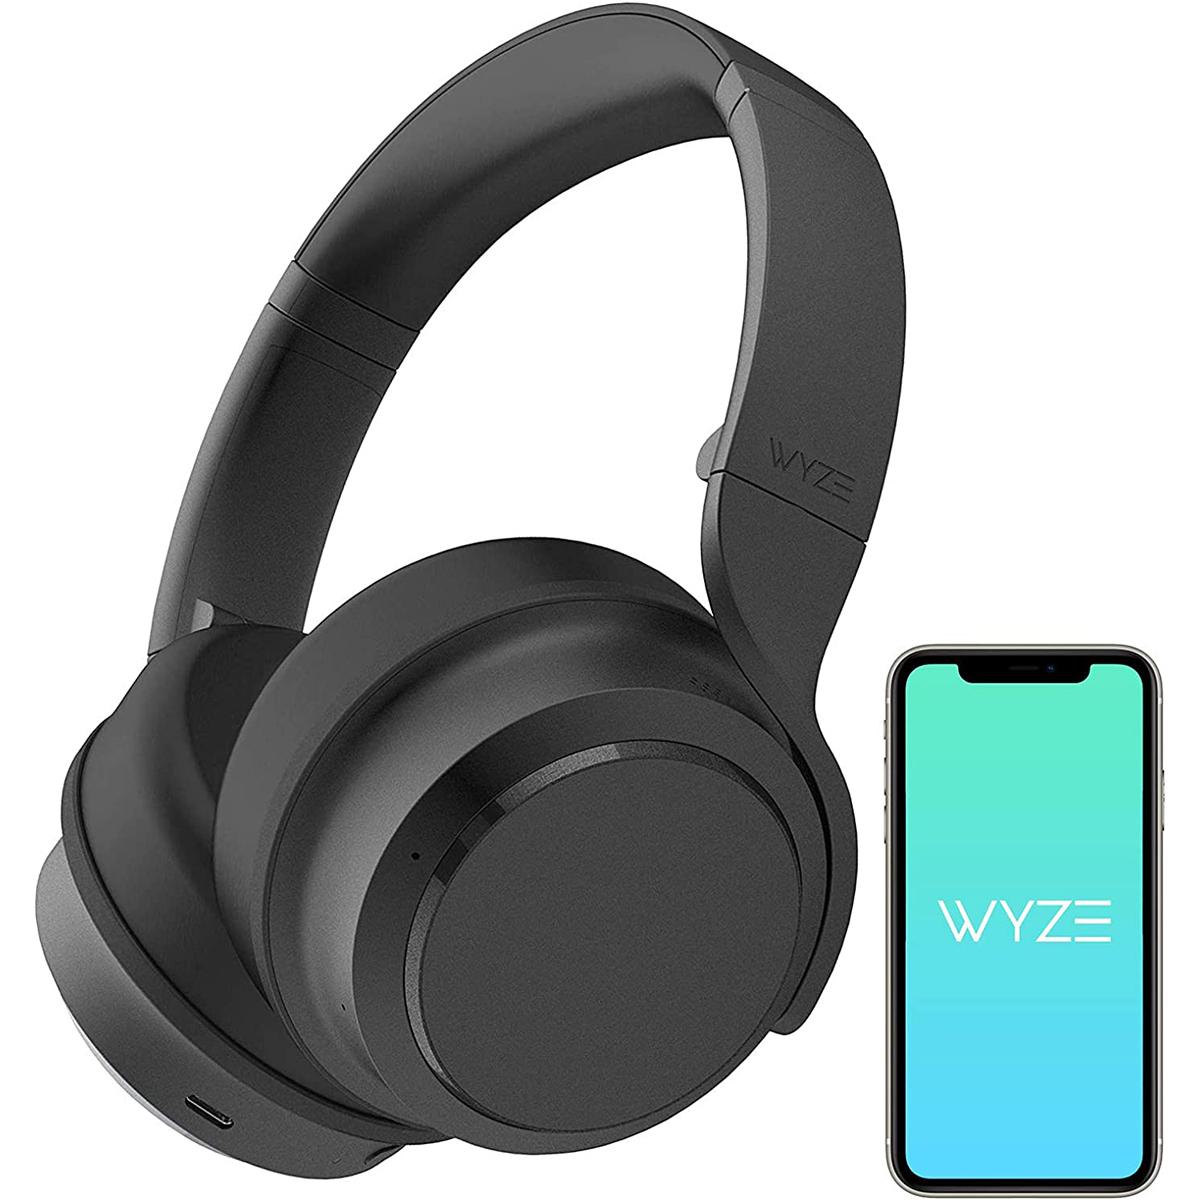 Wyze Bluetooth 5.0 ANC Over the Ear Headphones for $44.98 Shipped